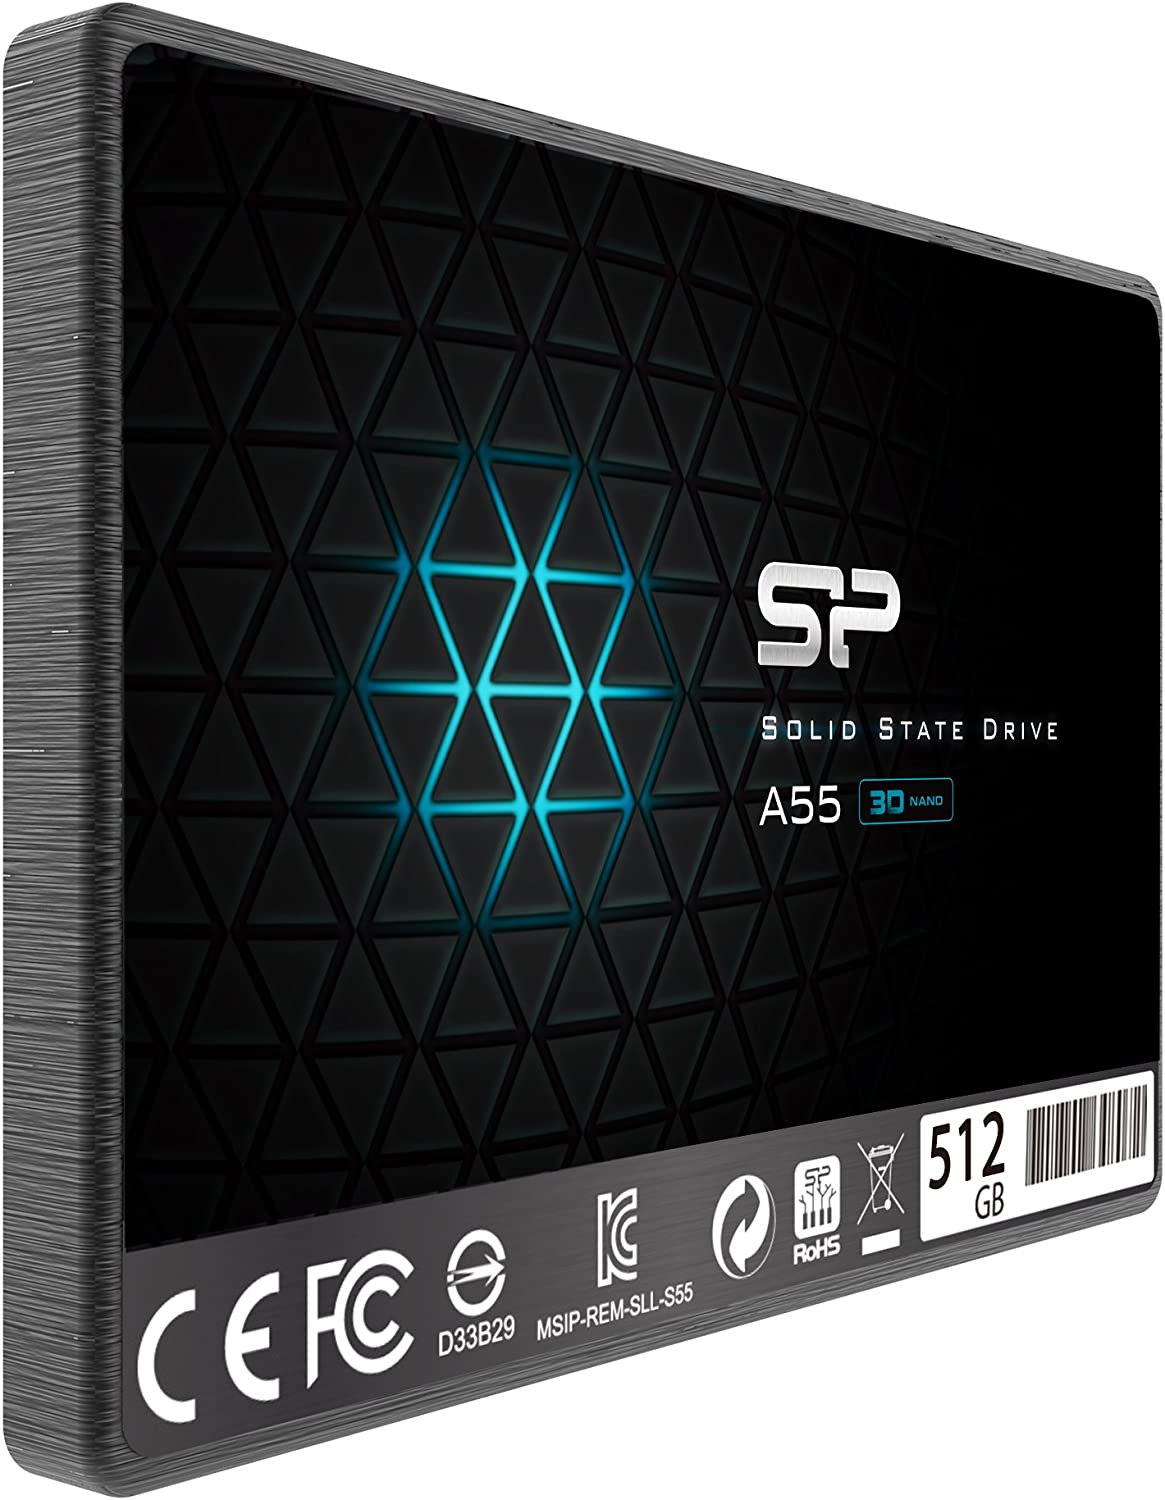 SILICON POWER 2.5"SATA SSD A55 512GB SOLID STATE DRIVE-SOLID STATE DRIVE-Makotek Computers